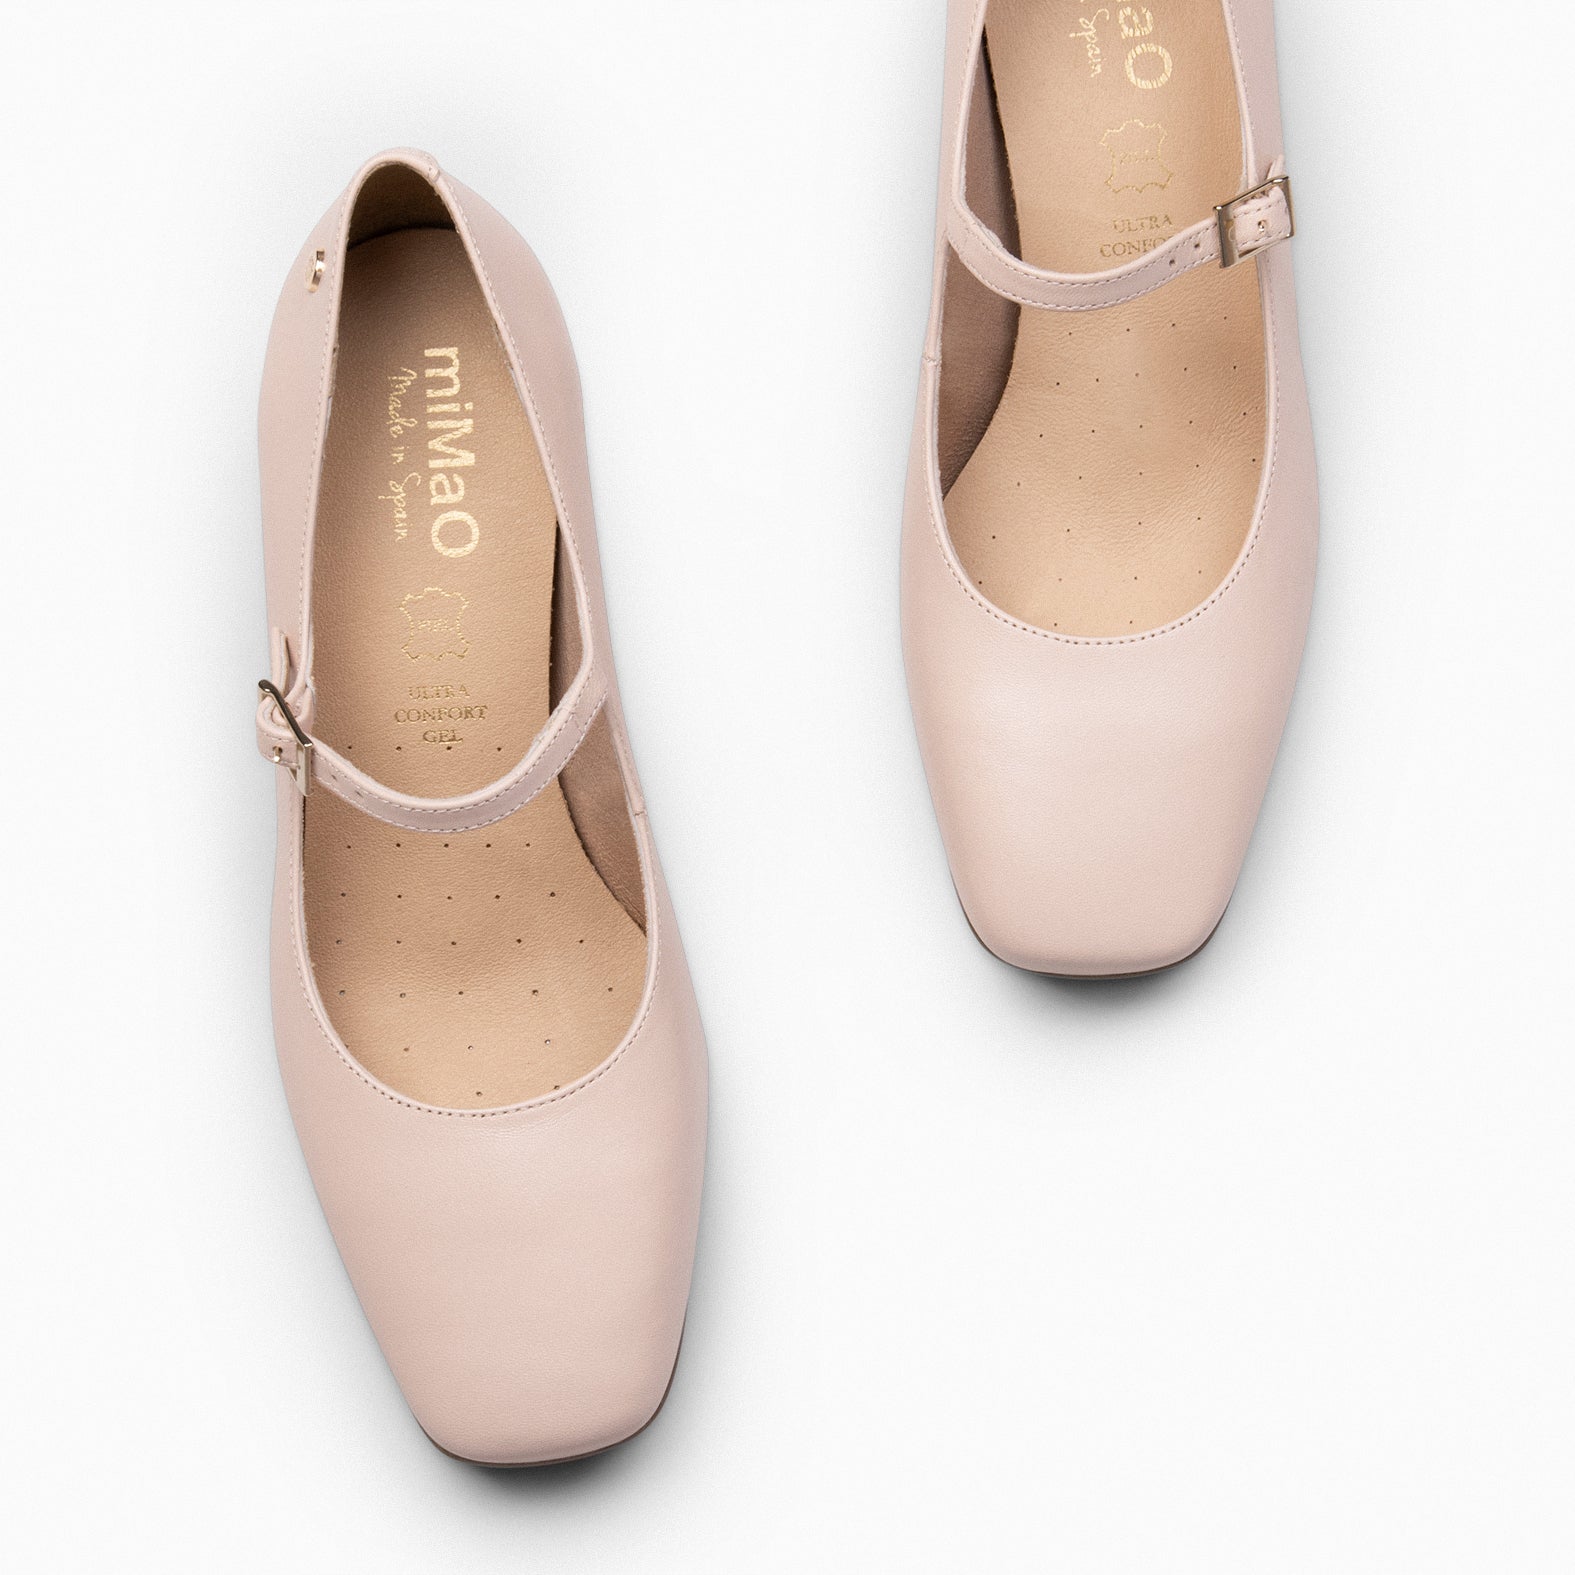 BELLA – NUDE suede leather mary-jane shoes